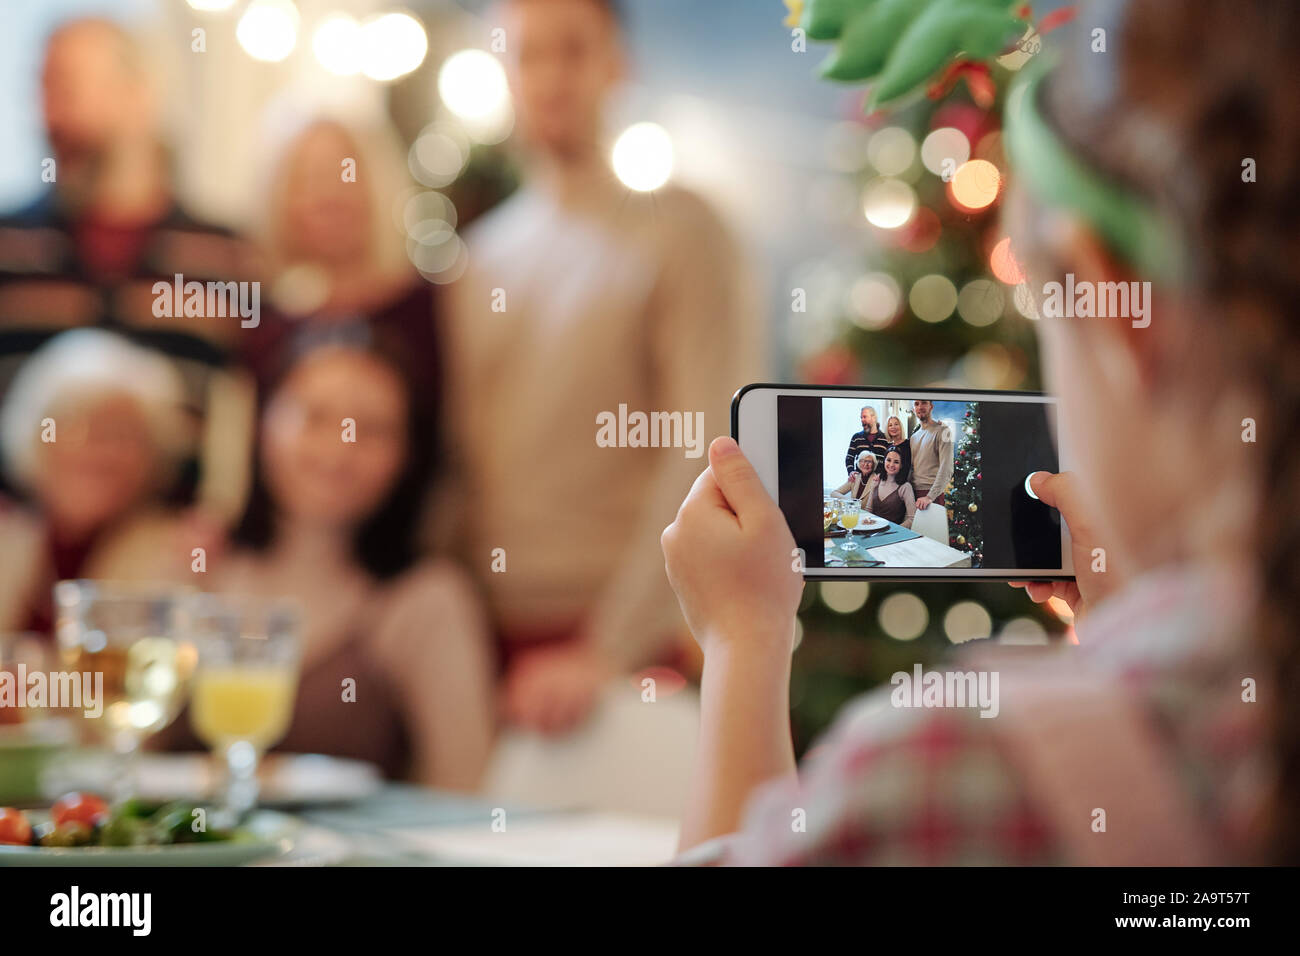 Little girl with smartphone taking photo of big happy family gathered for dinner Stock Photo